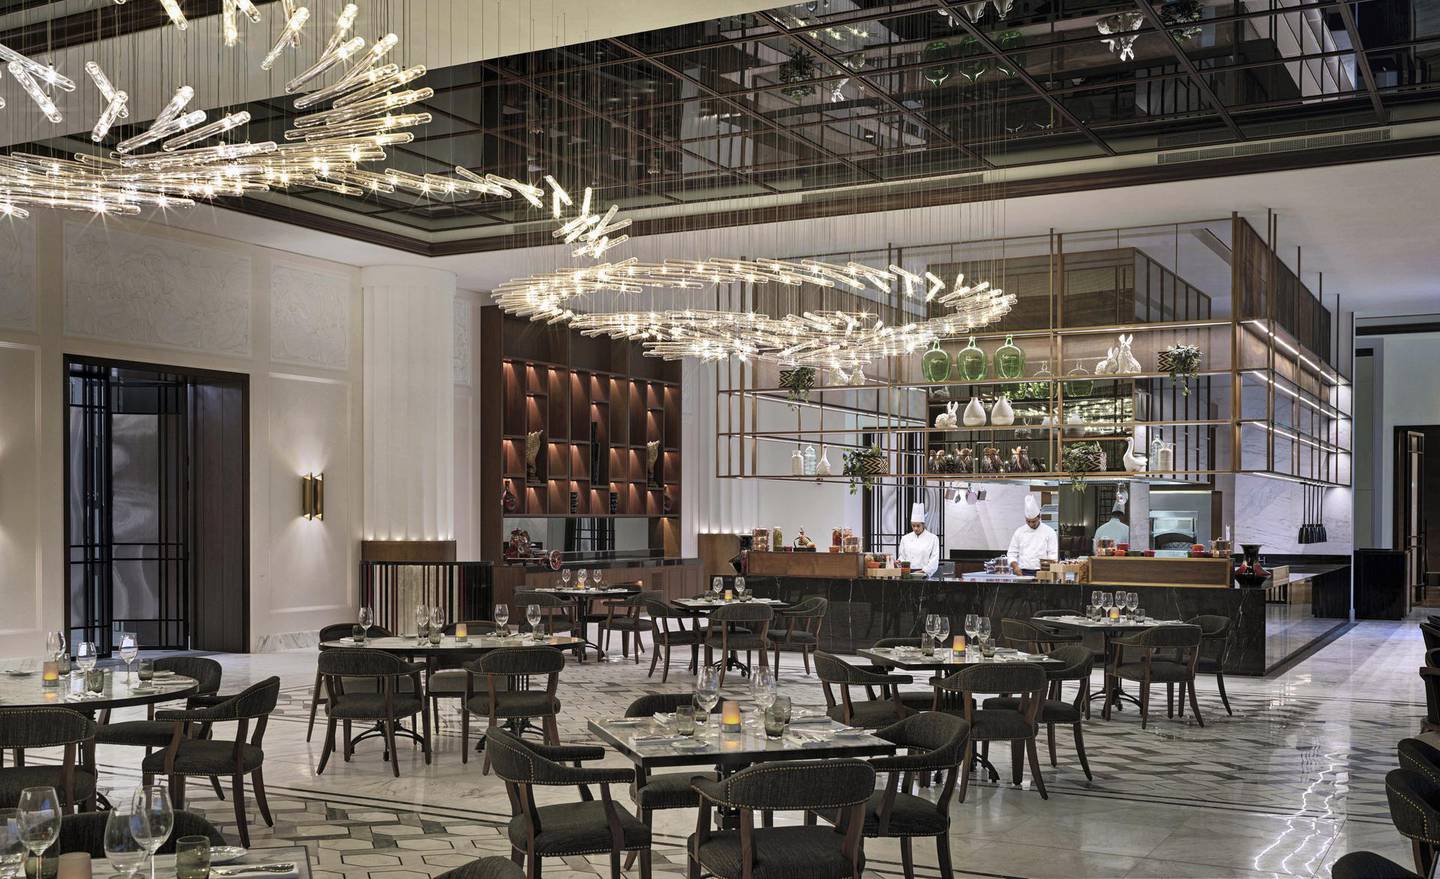 The art deco-inspired interiors of Brasserie Boulud feature a mirrored ceiling and chandeliers